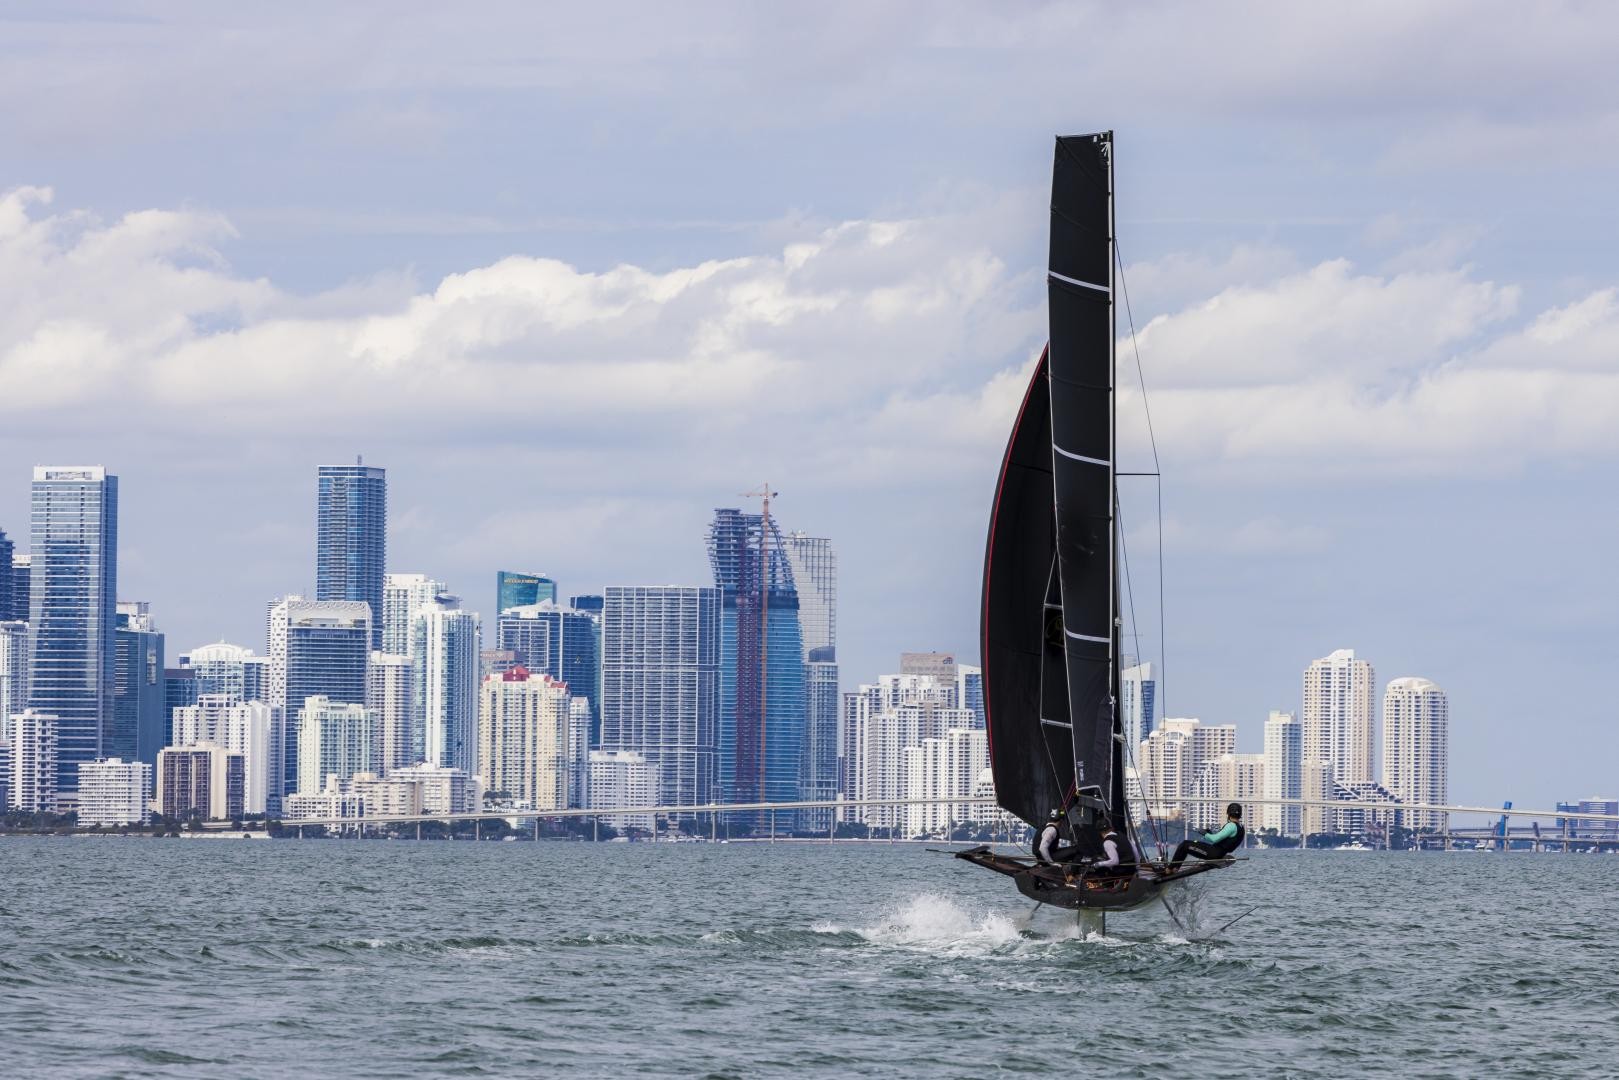 All to play for at Bacardi Winter Series event 2 in Biscayne Bay, Miami